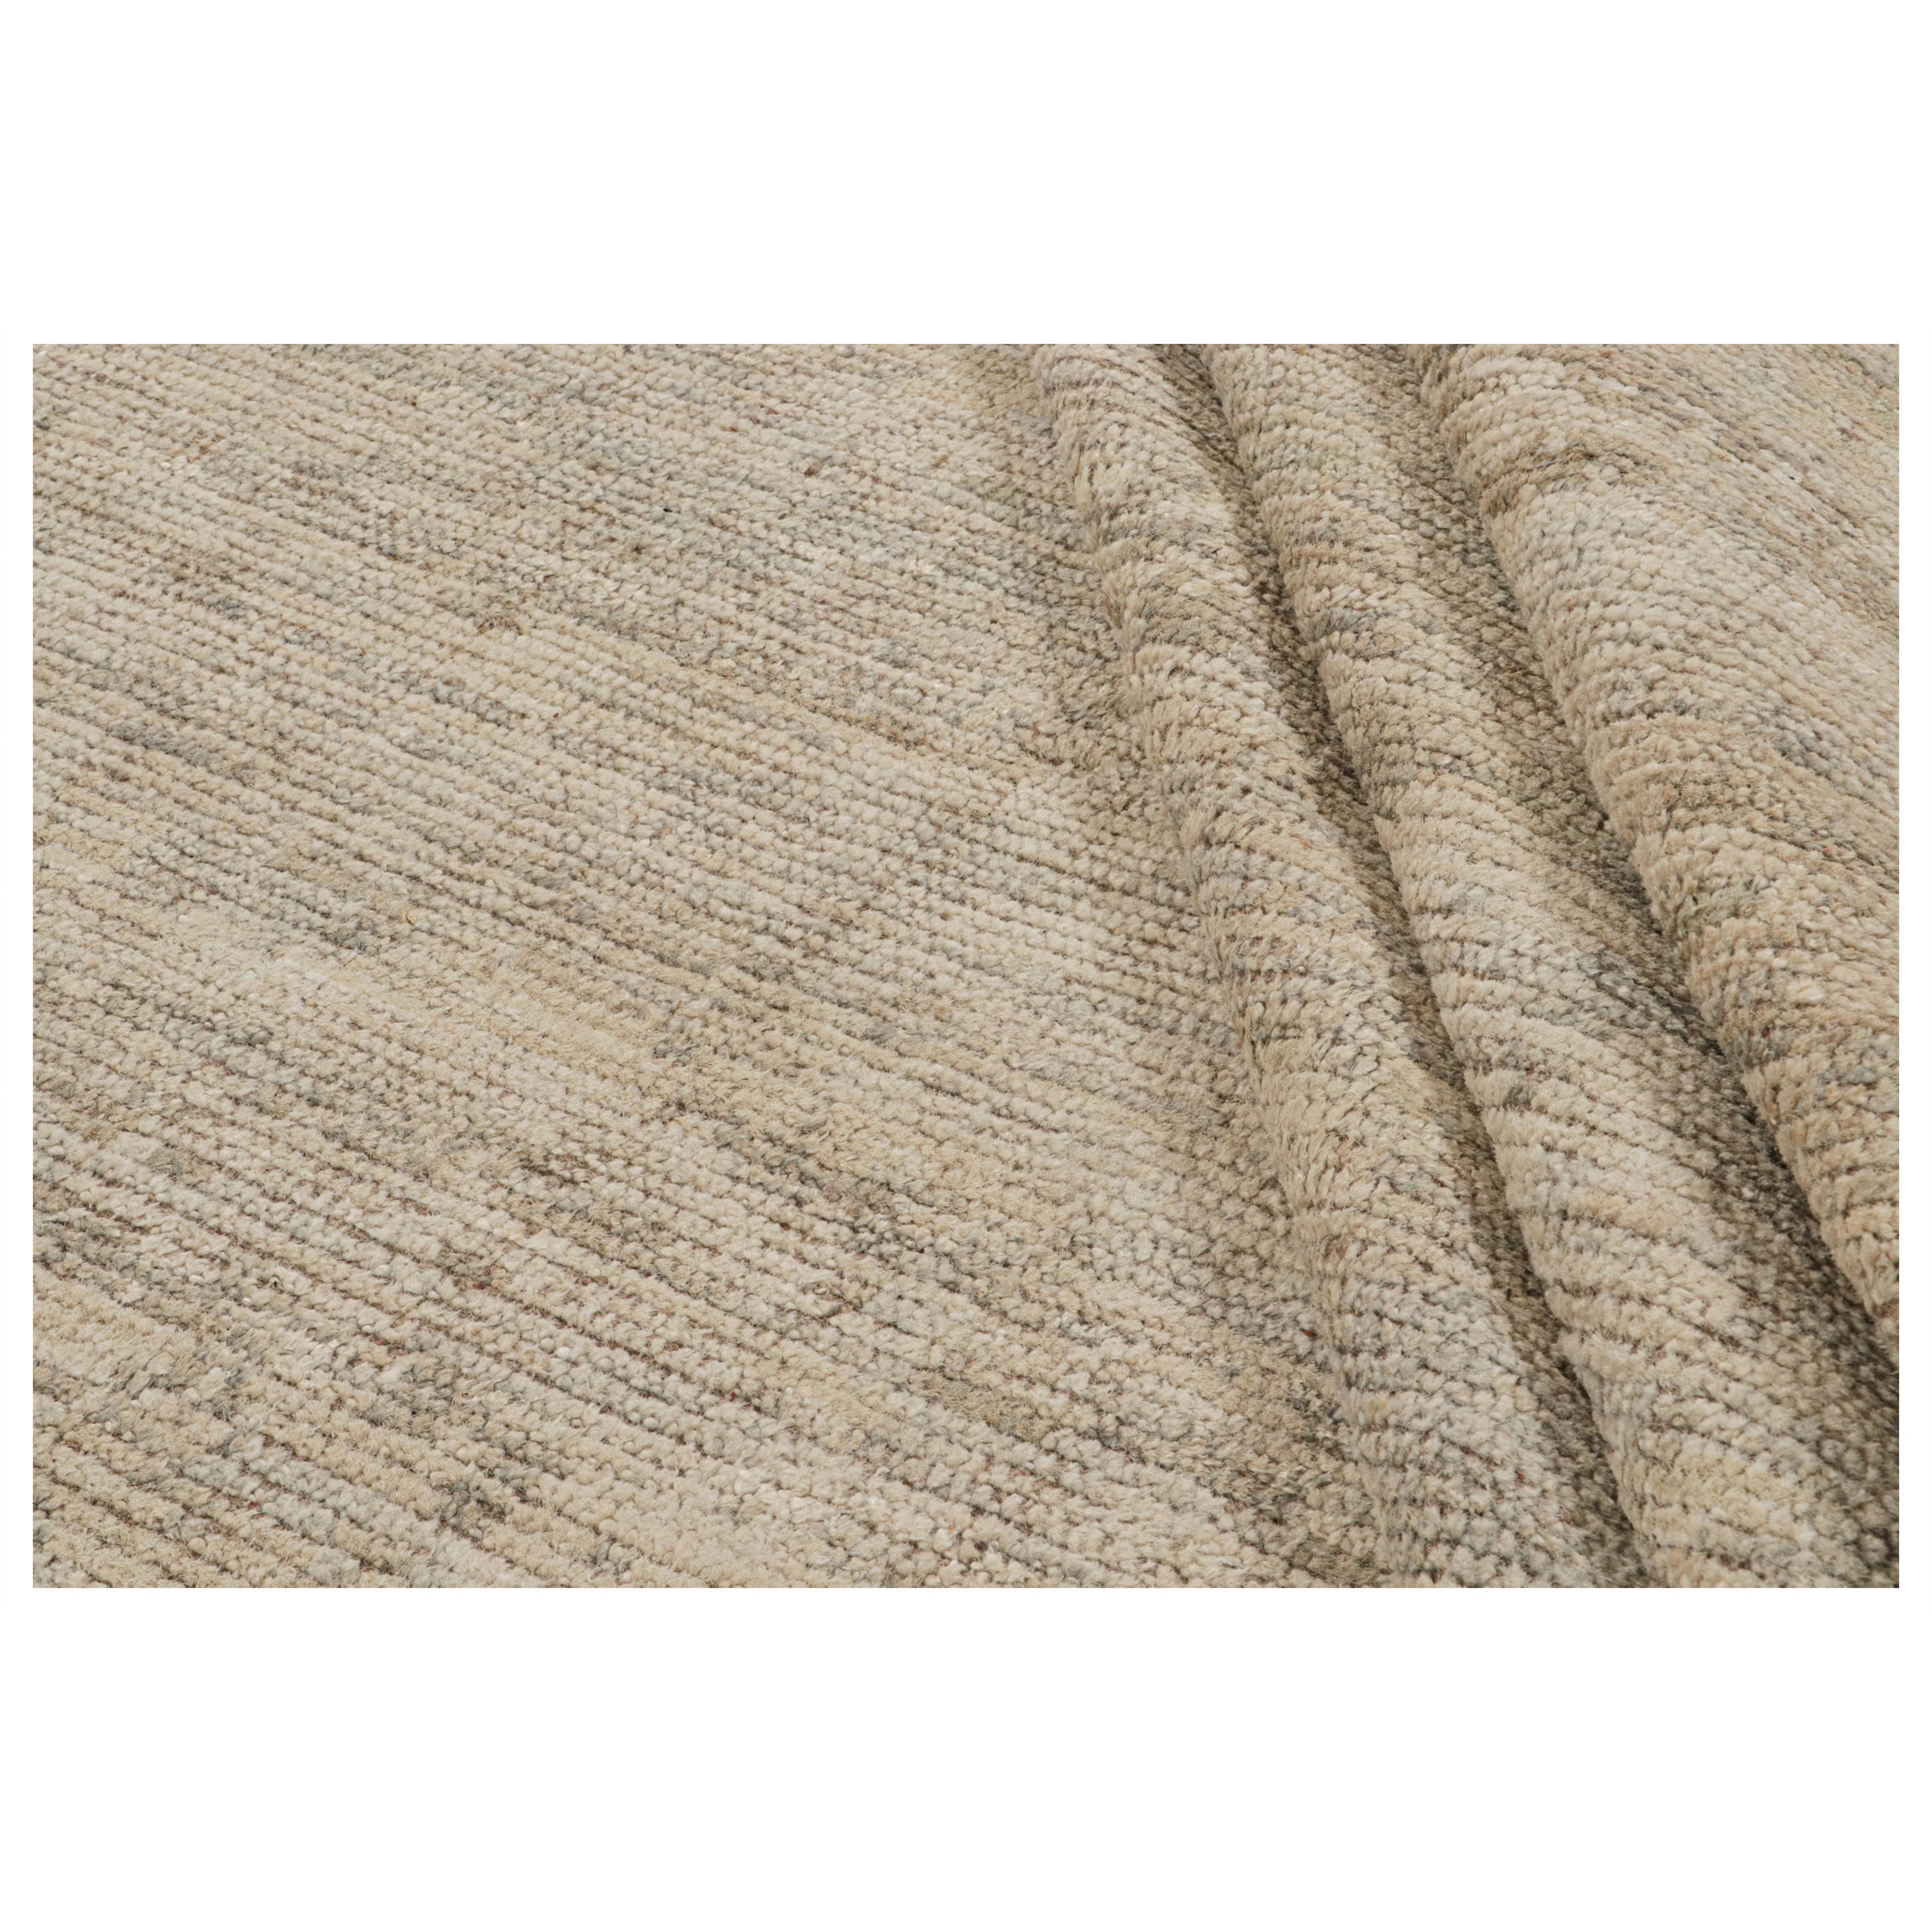  Rug & Kilim’s Contemporary Rug in Beige and Gray Tone-on-Tone Striae For Sale